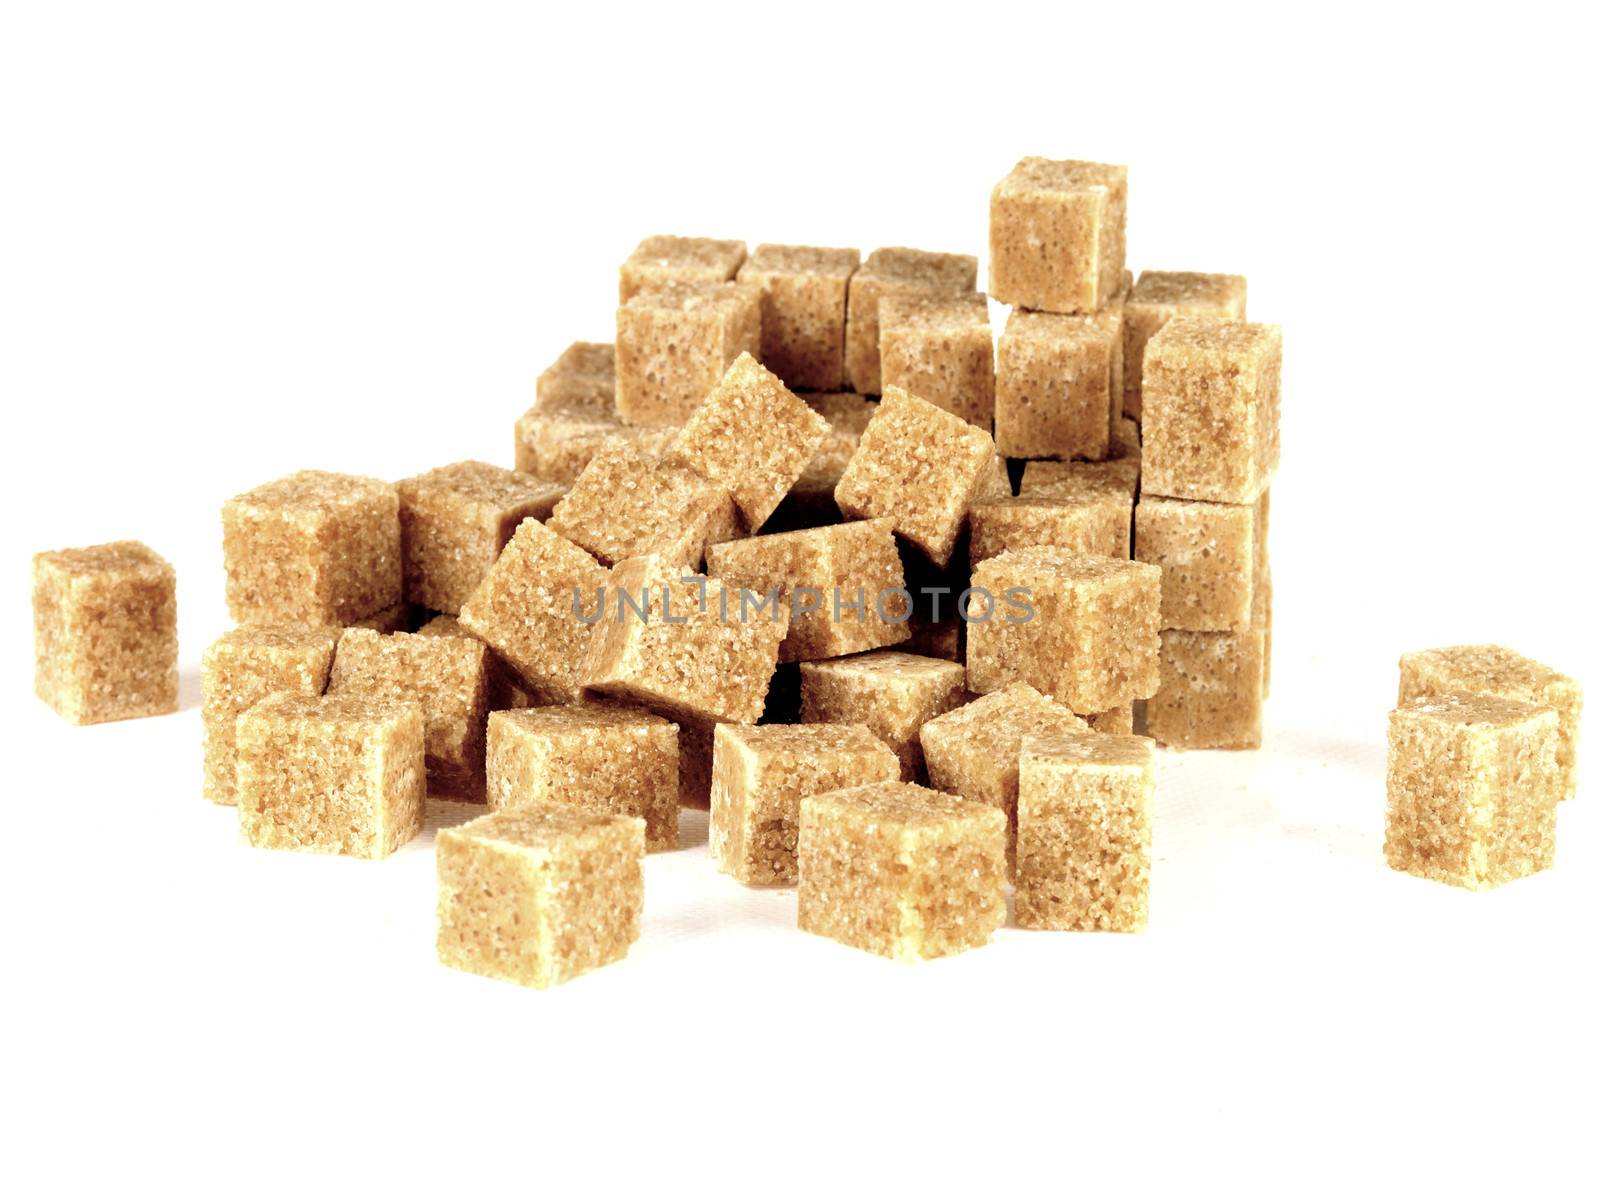 Brown Sugar Cubes by Whiteboxmedia